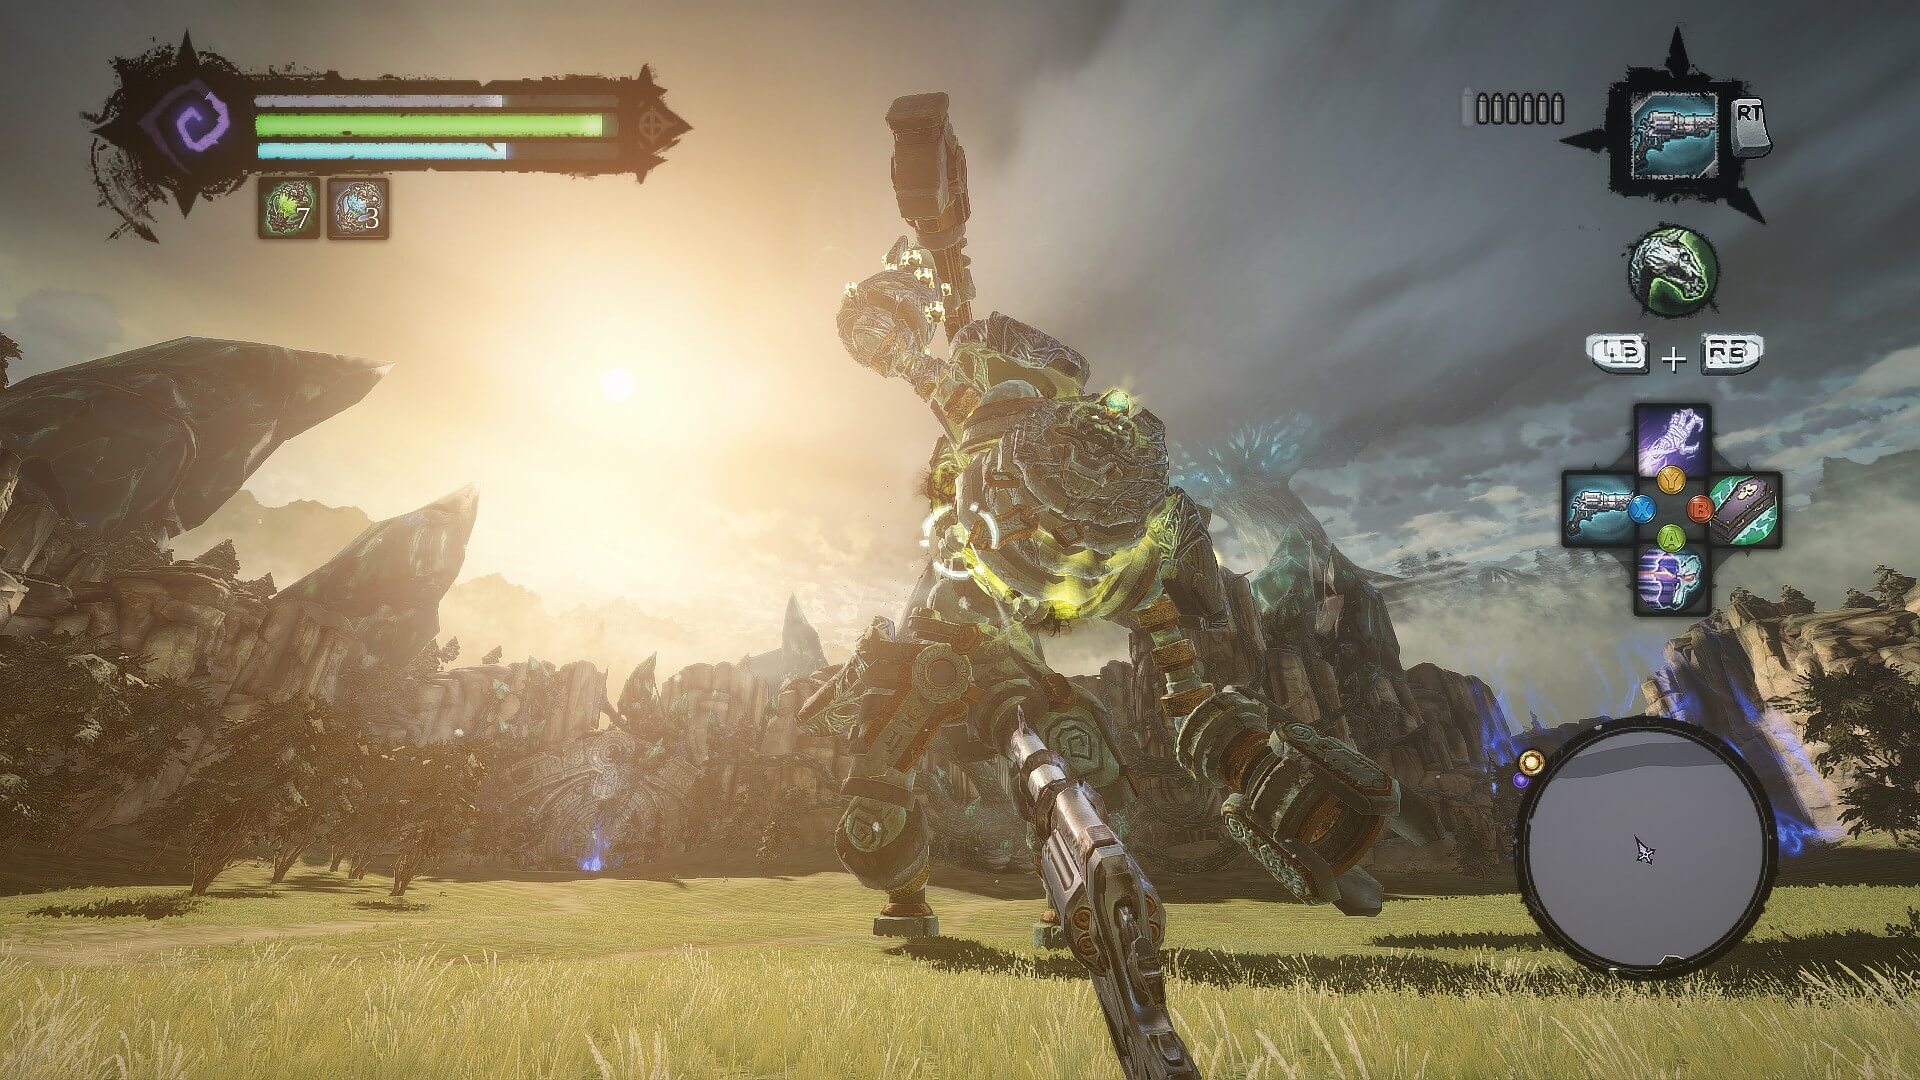 This mod allows you to play Darksiders 2 in first-person mode as ...